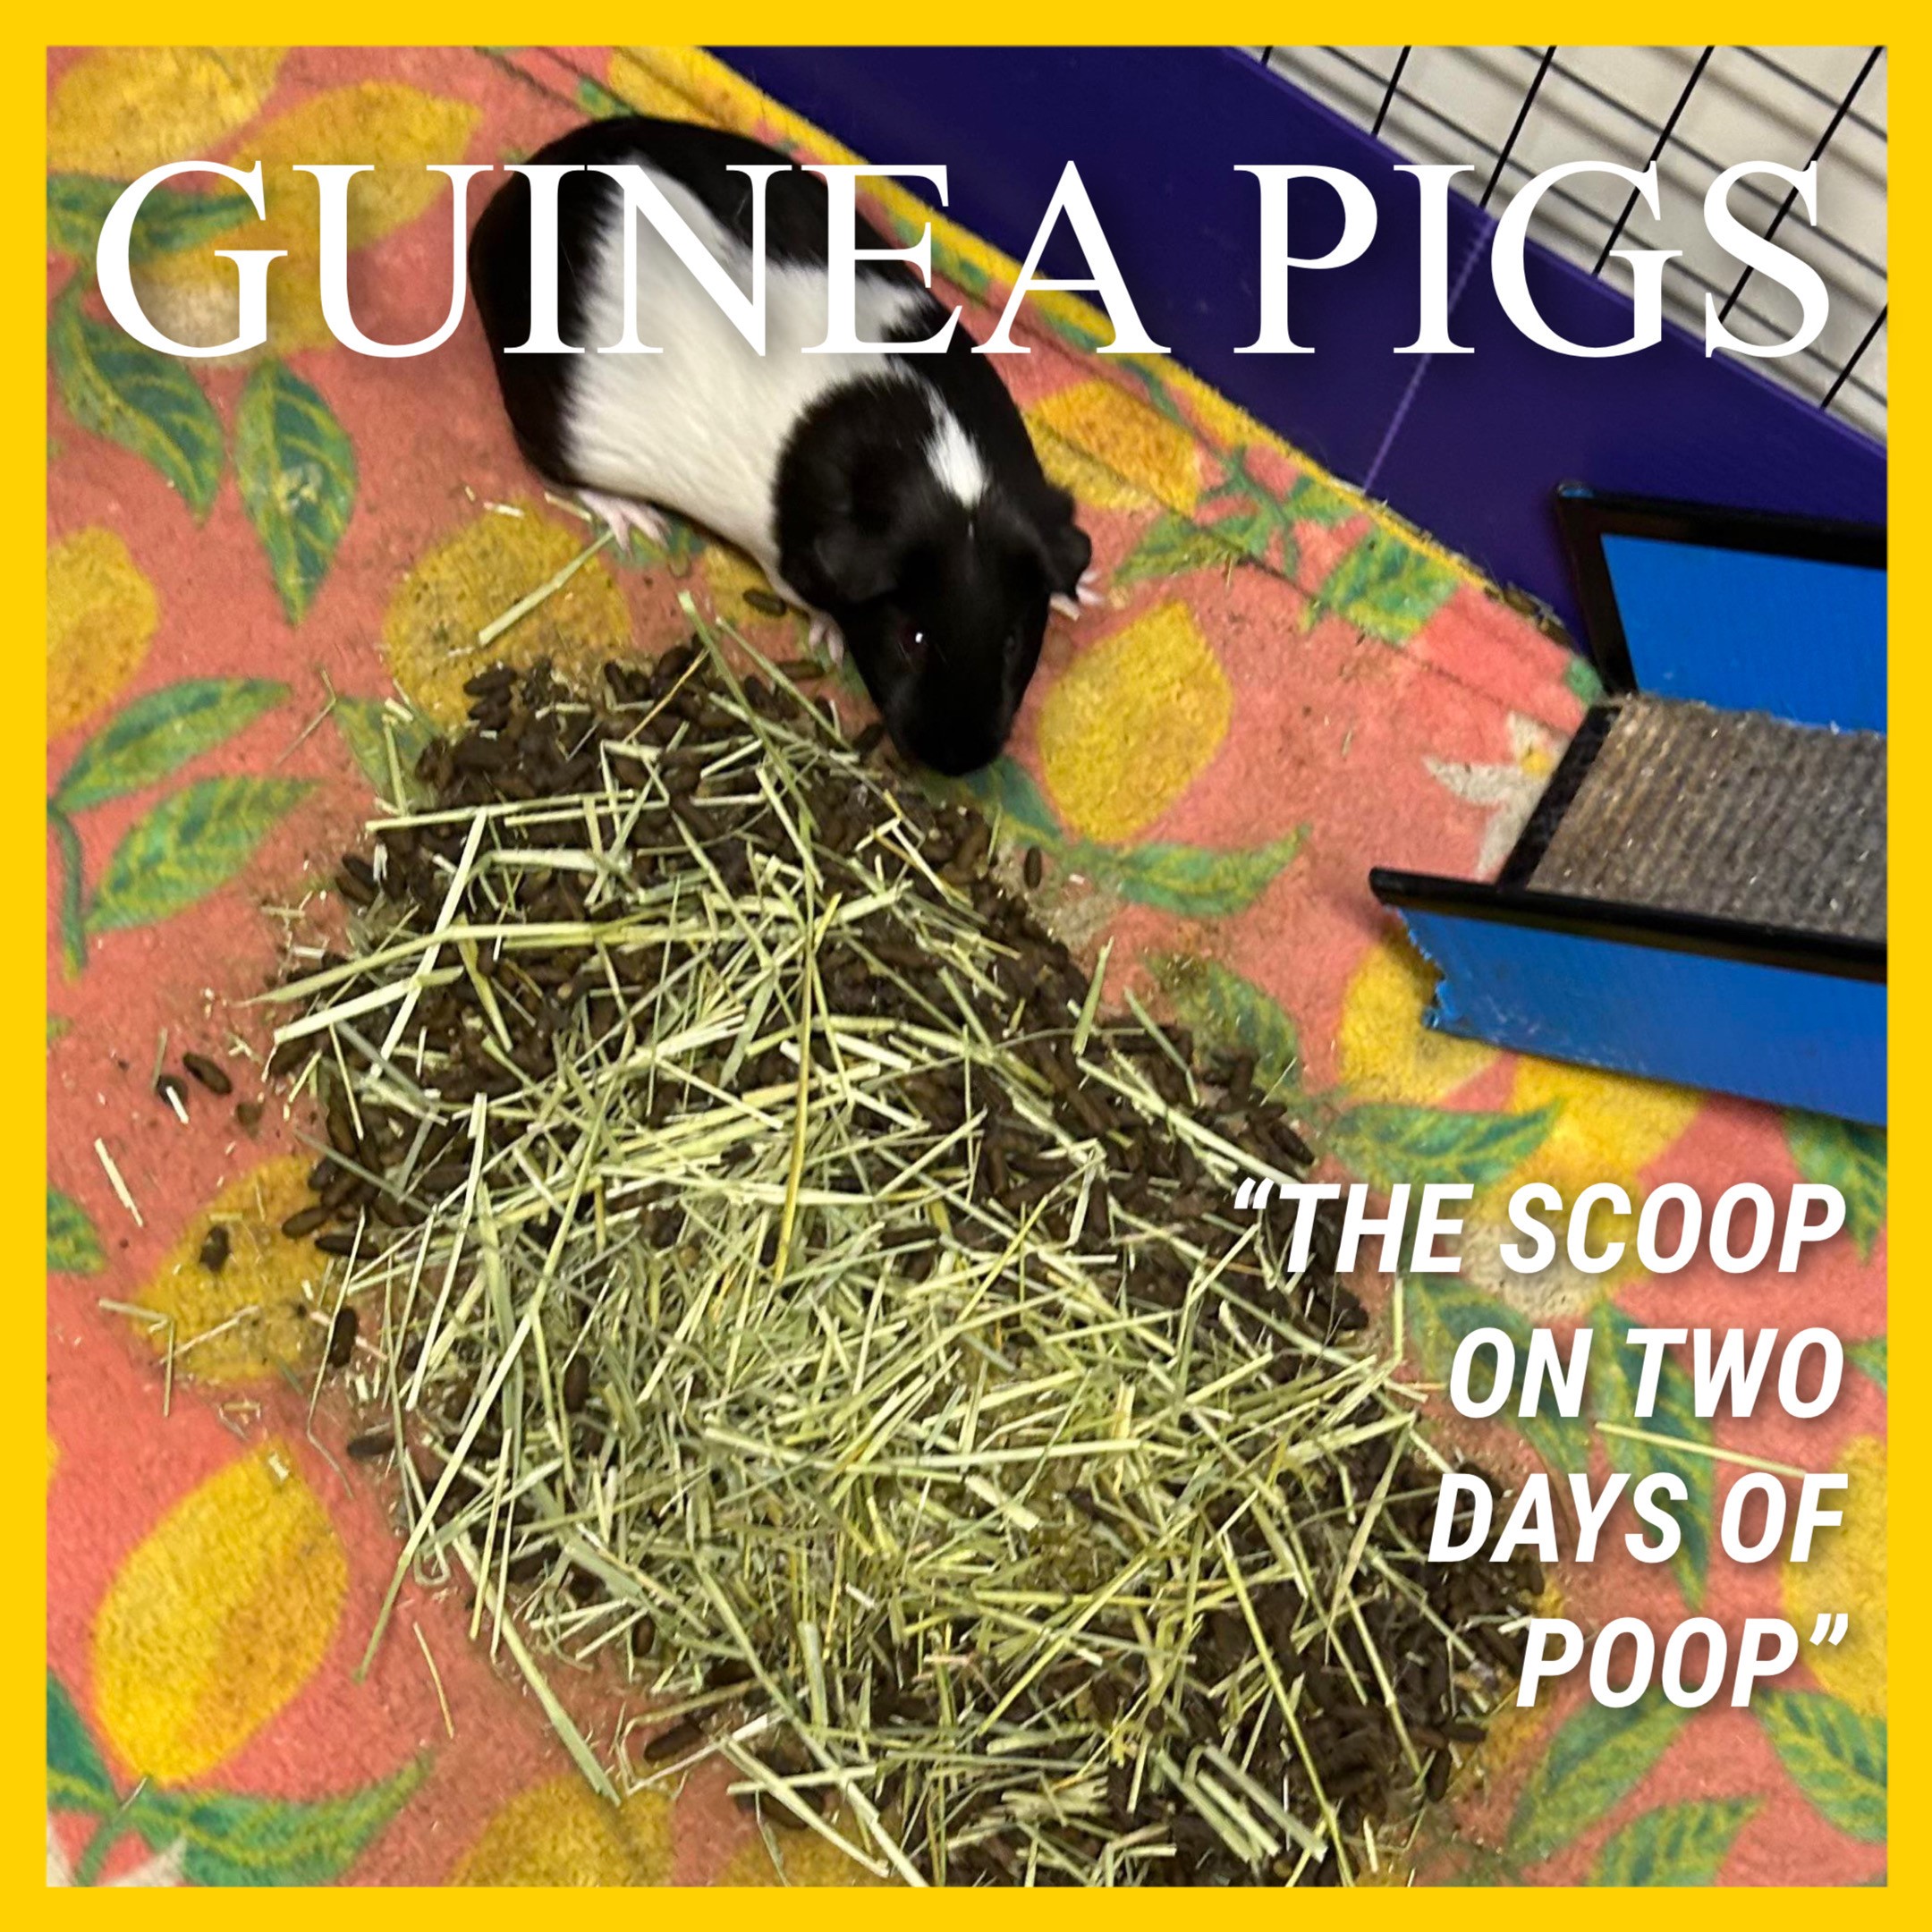 Fleece Bedding for Guinea Pigs – The stinky truth ? ?